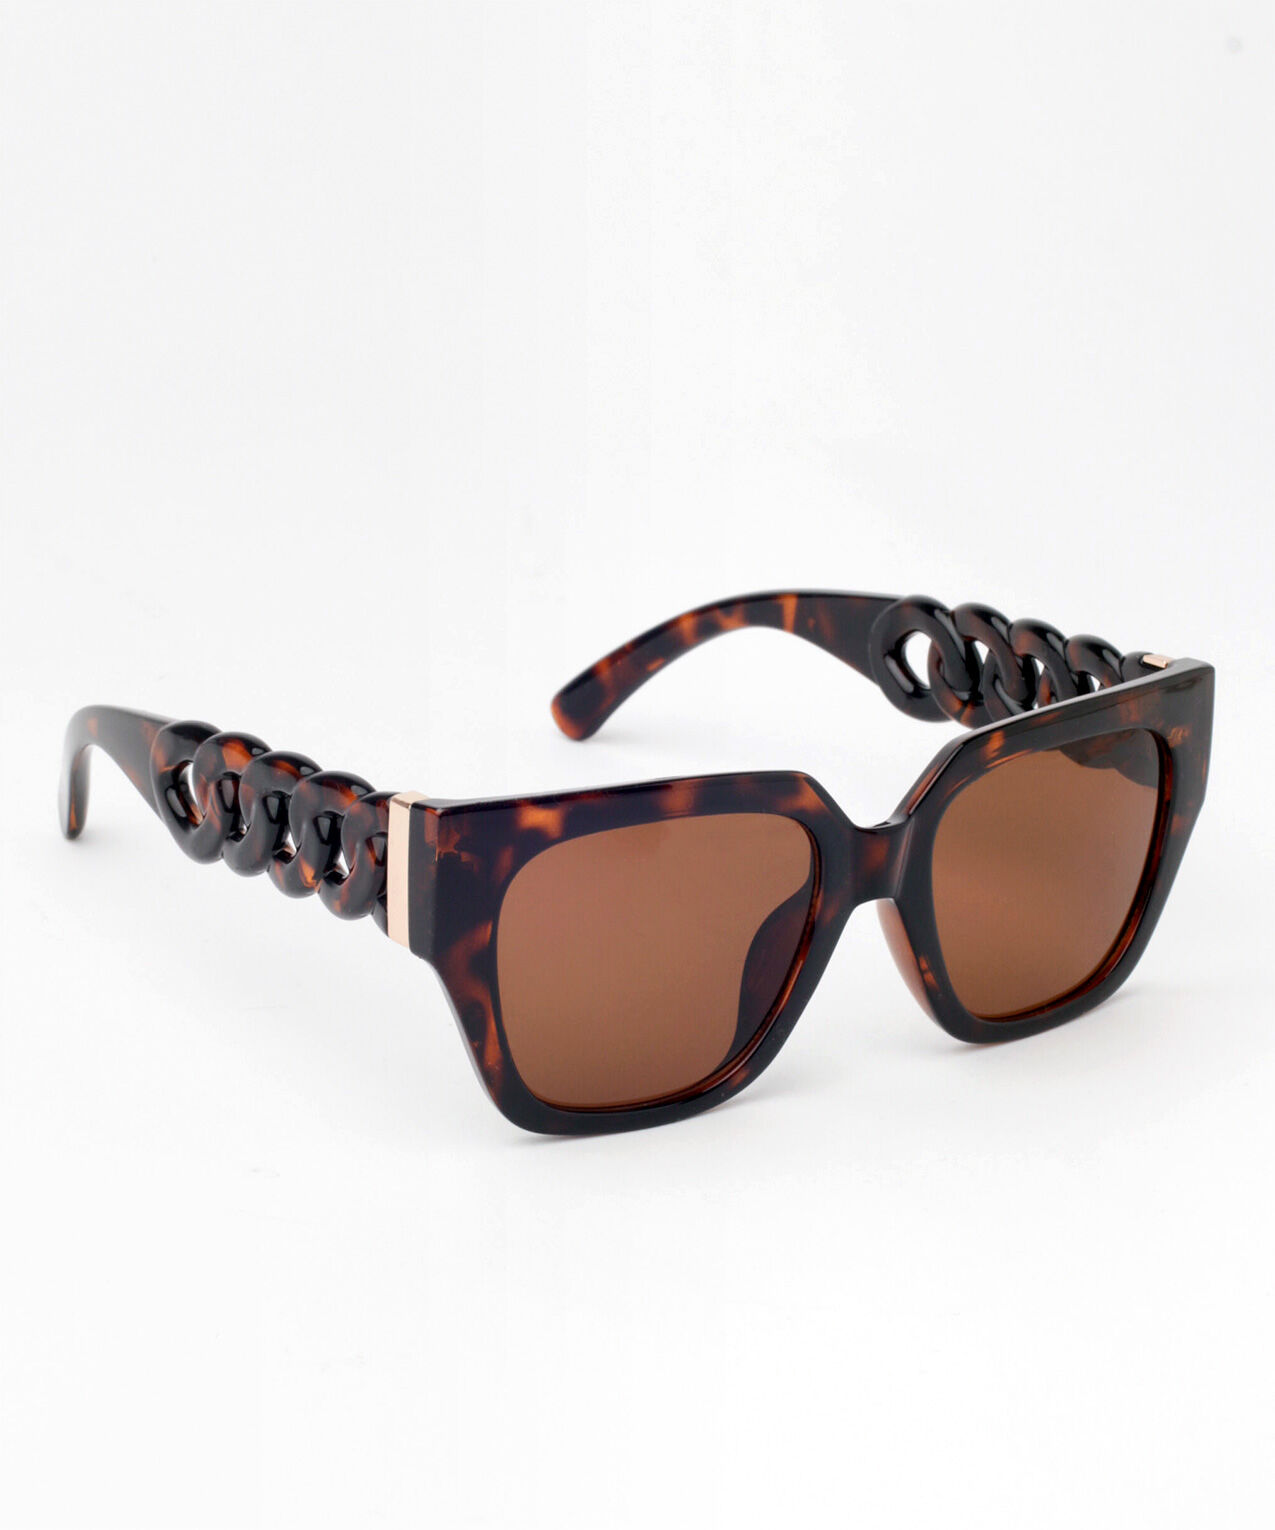 Tortoise Sunglasses with Chain Arm Detail